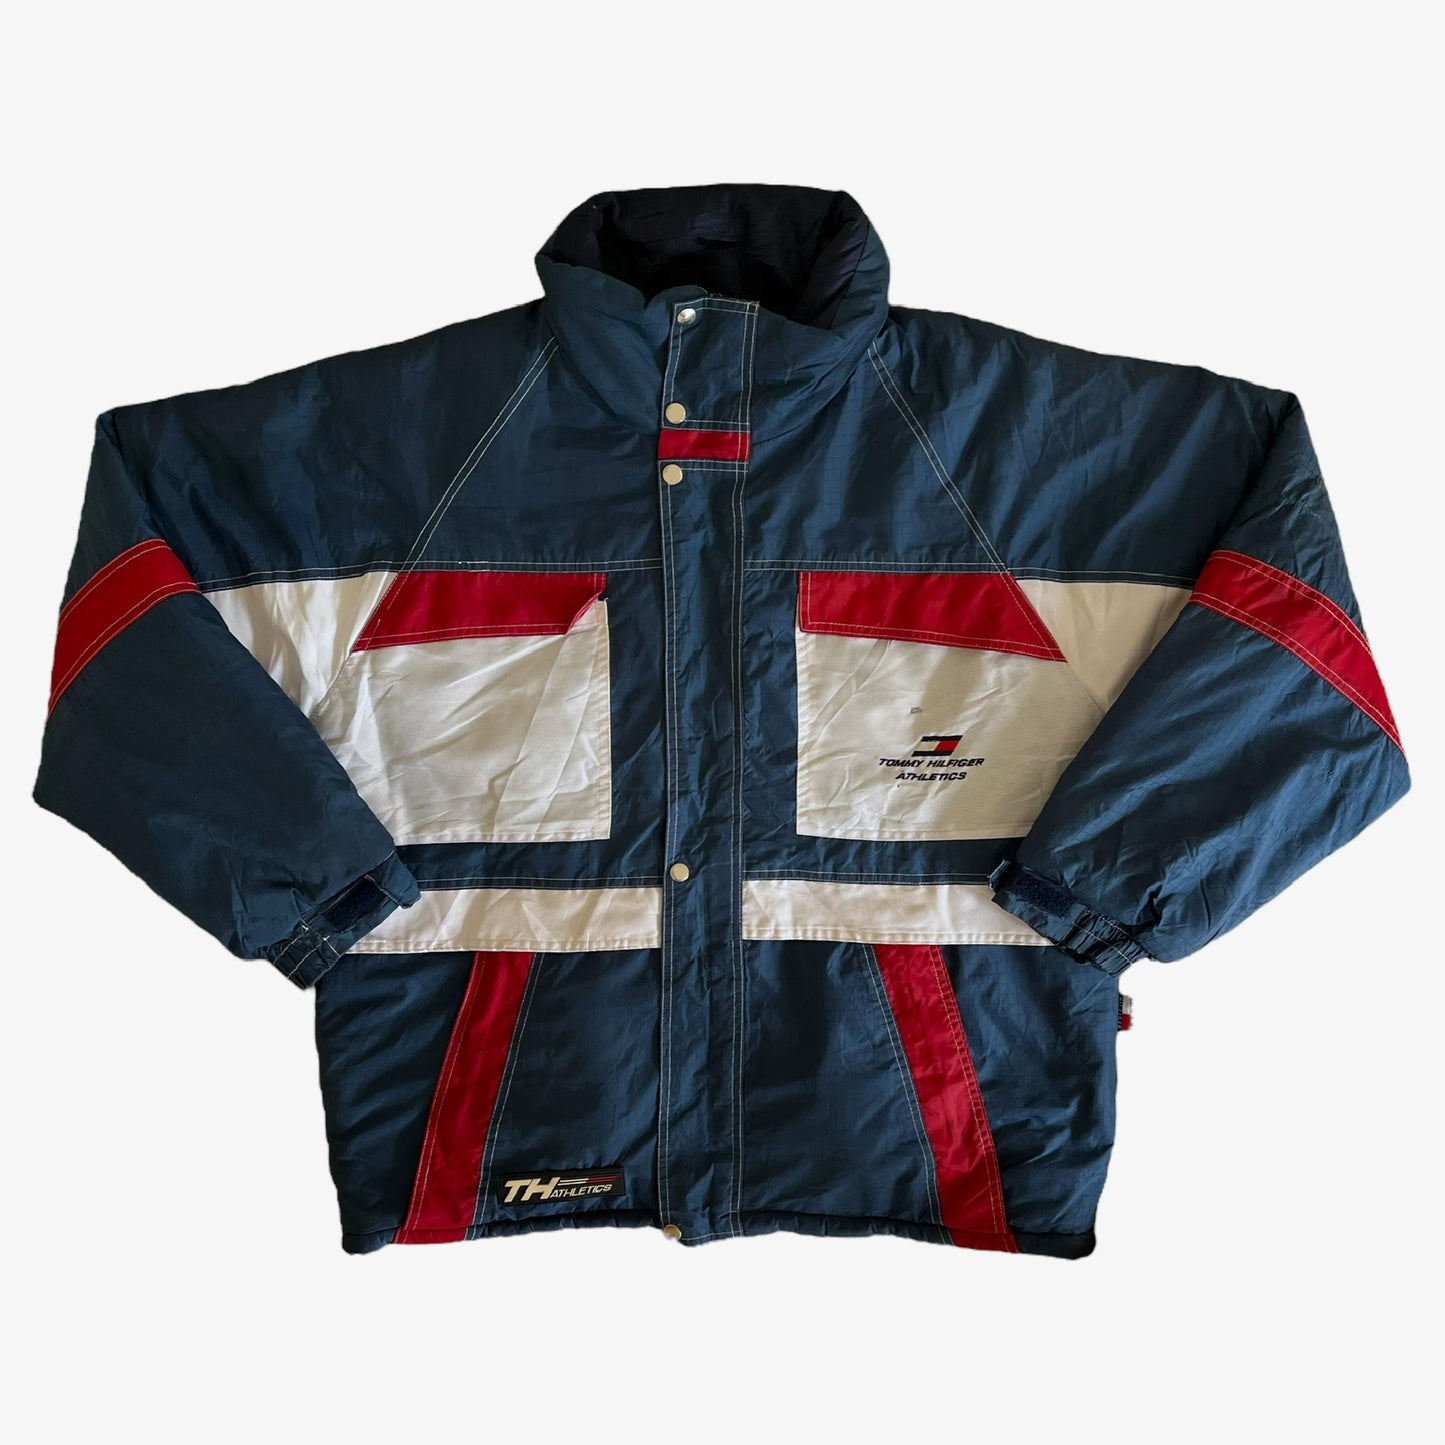 Vintage 90s Tommy Hilfiger Athletics Reversible Spell Out Puffer Jacket - Casspios Dream